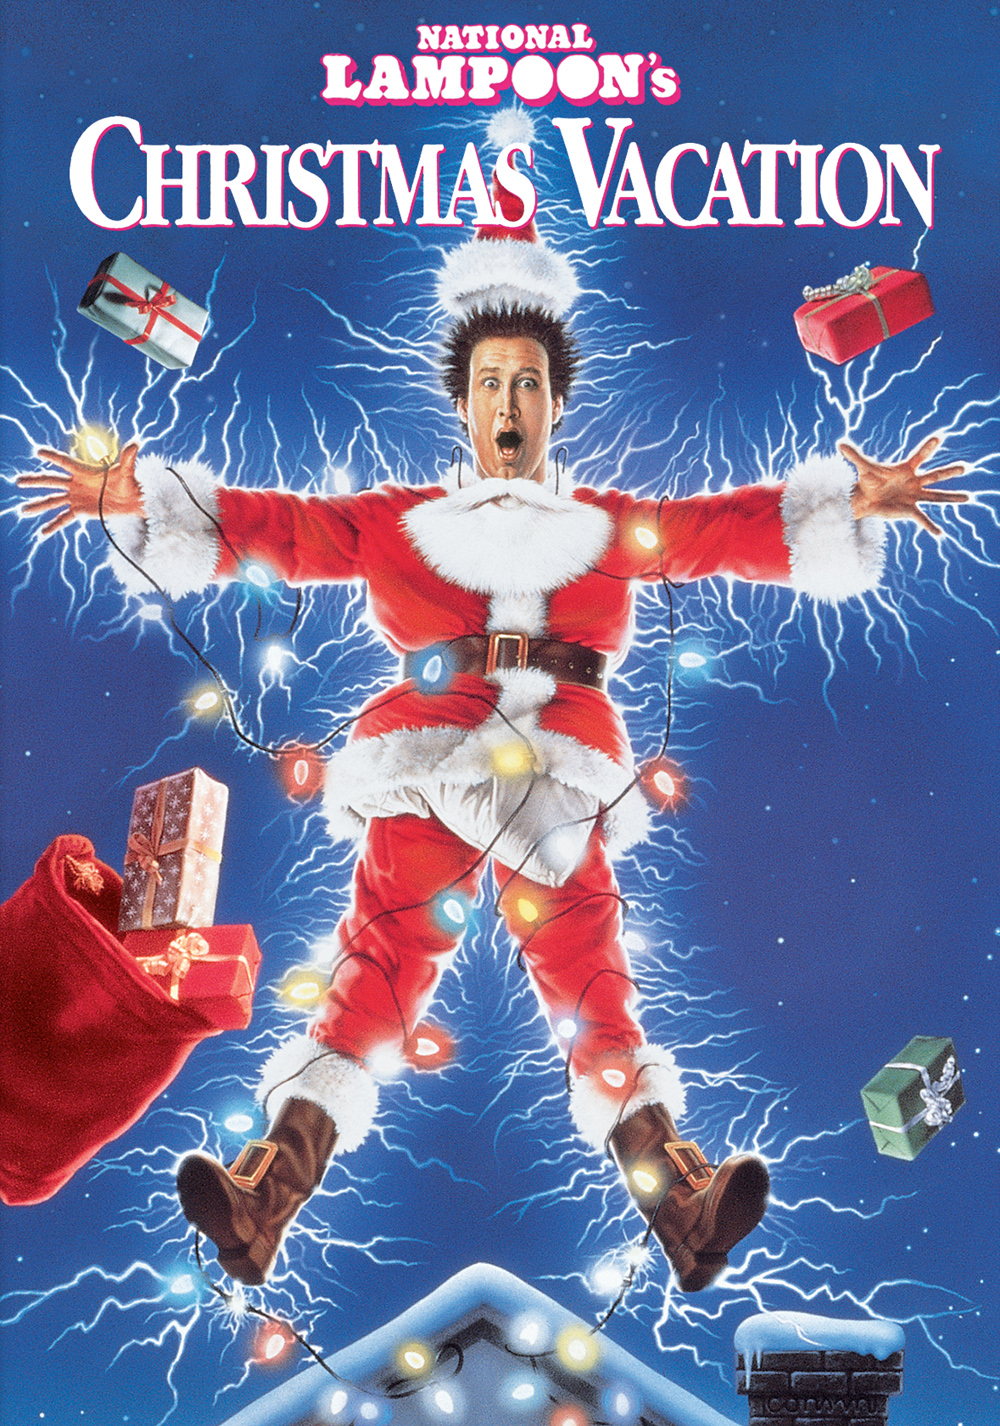 Image result for national lampoon's christmas vacation